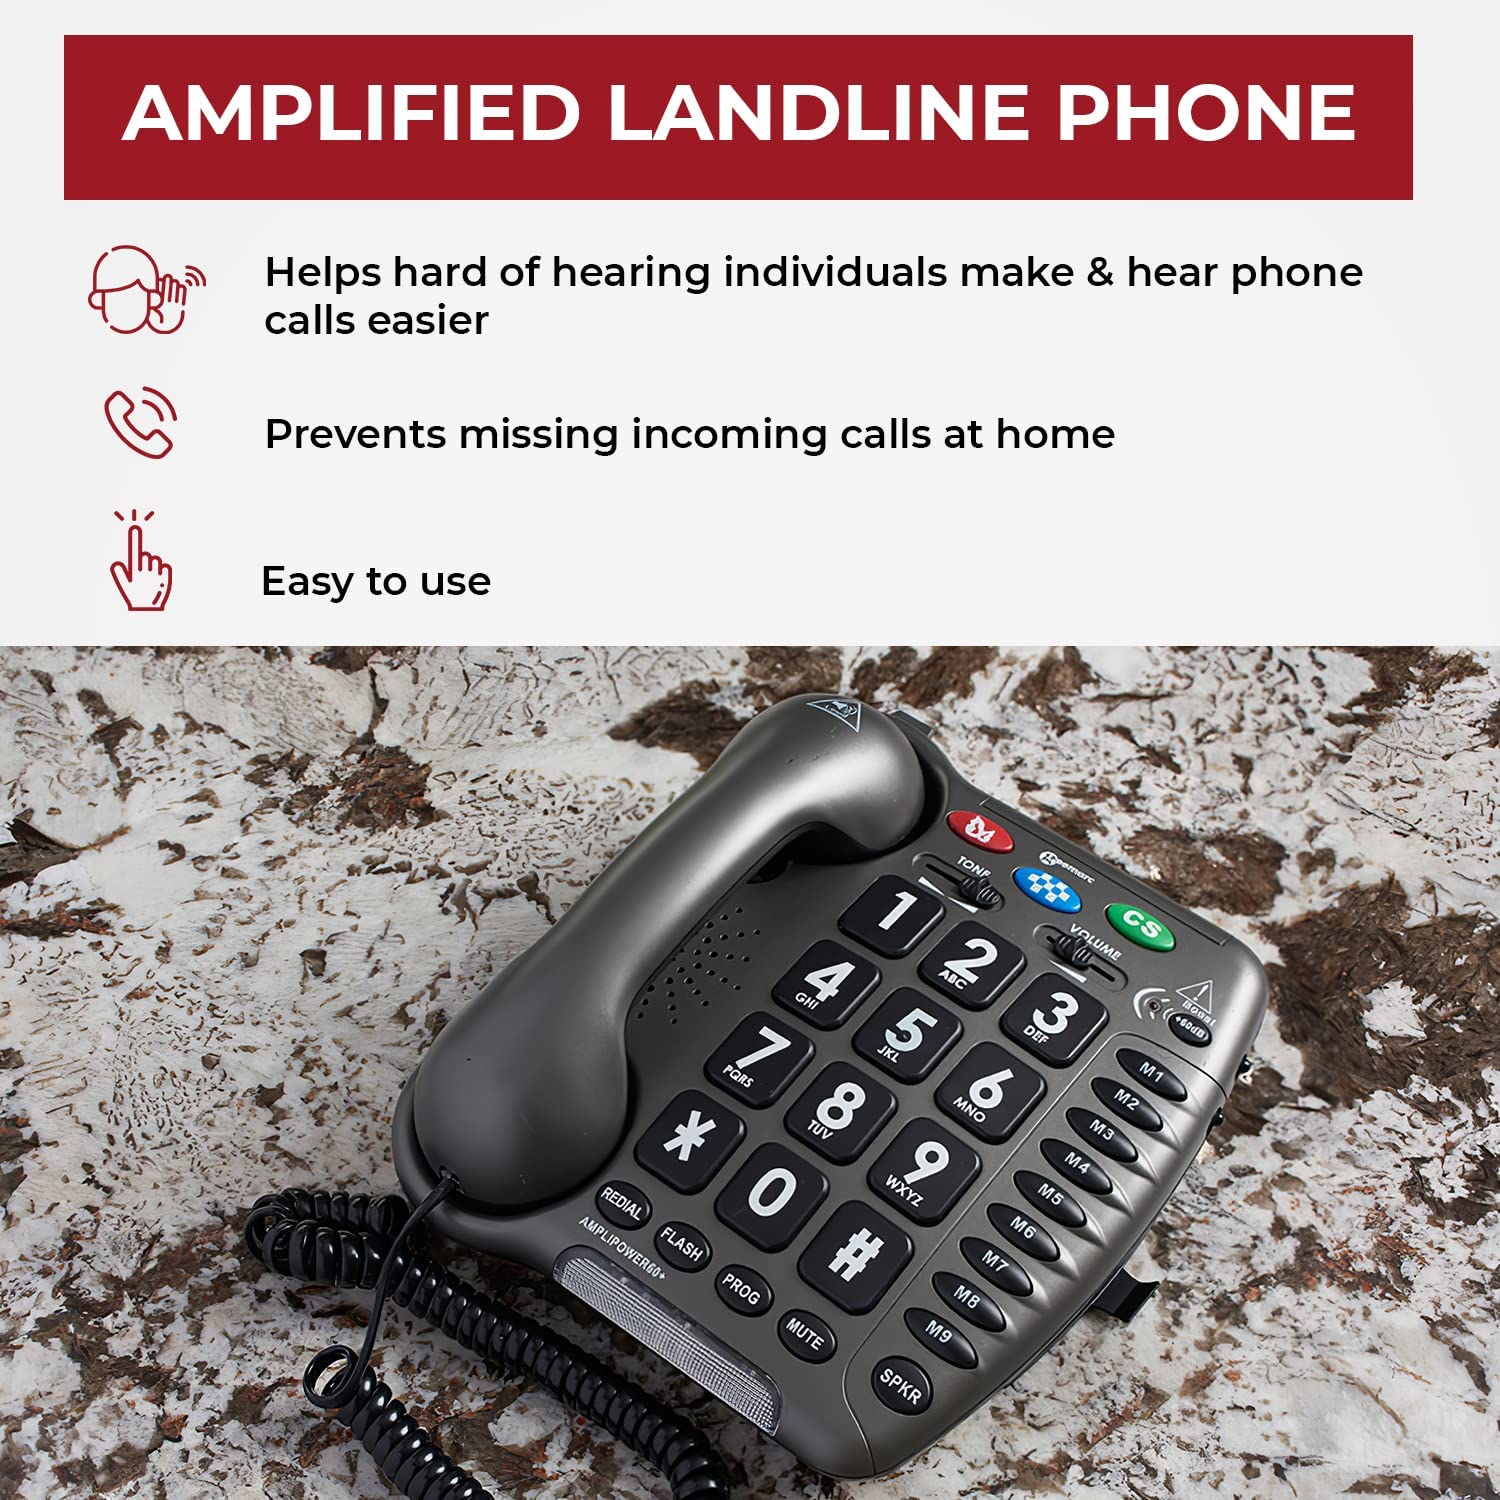 Sonic Alert - Amplified 67db Extra Loudspeaker Telephone with Large Display Buttons - Dark Gray - image 2 of 8